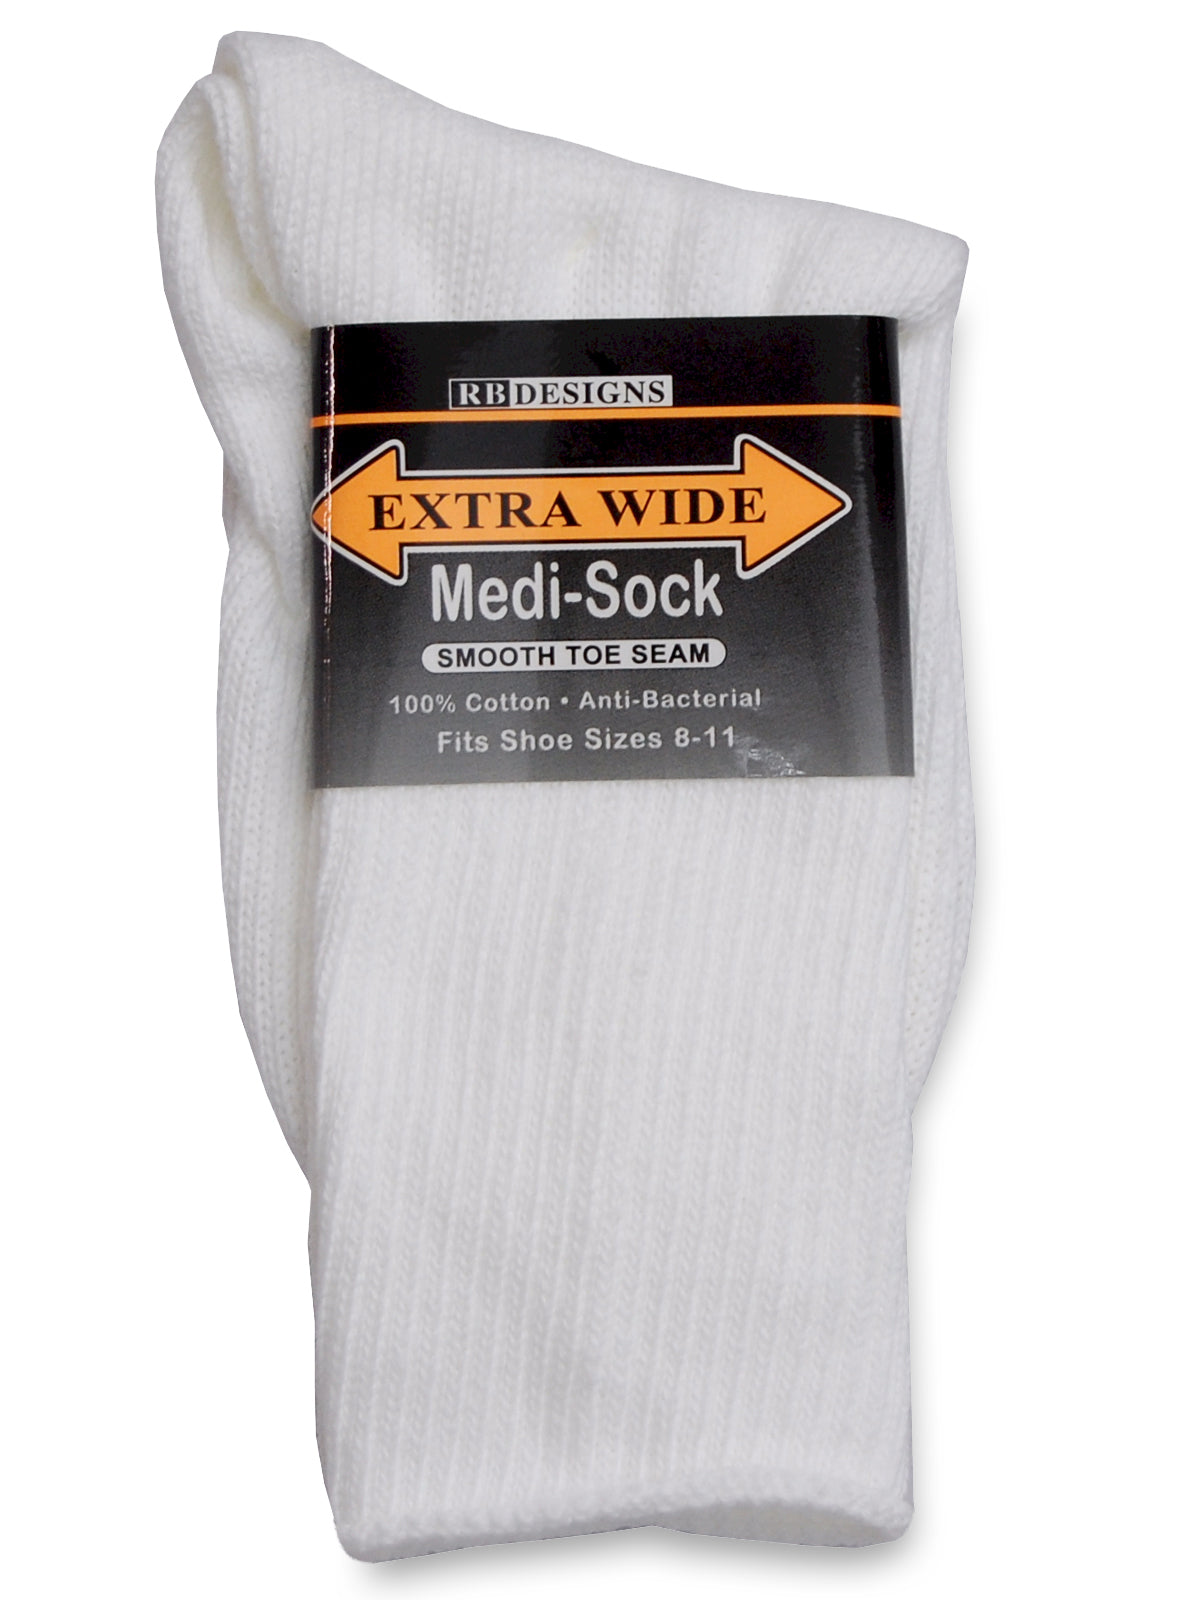 Extra Wide Medical Crew Sock in White - Size Medium (8.5 - 11.5)